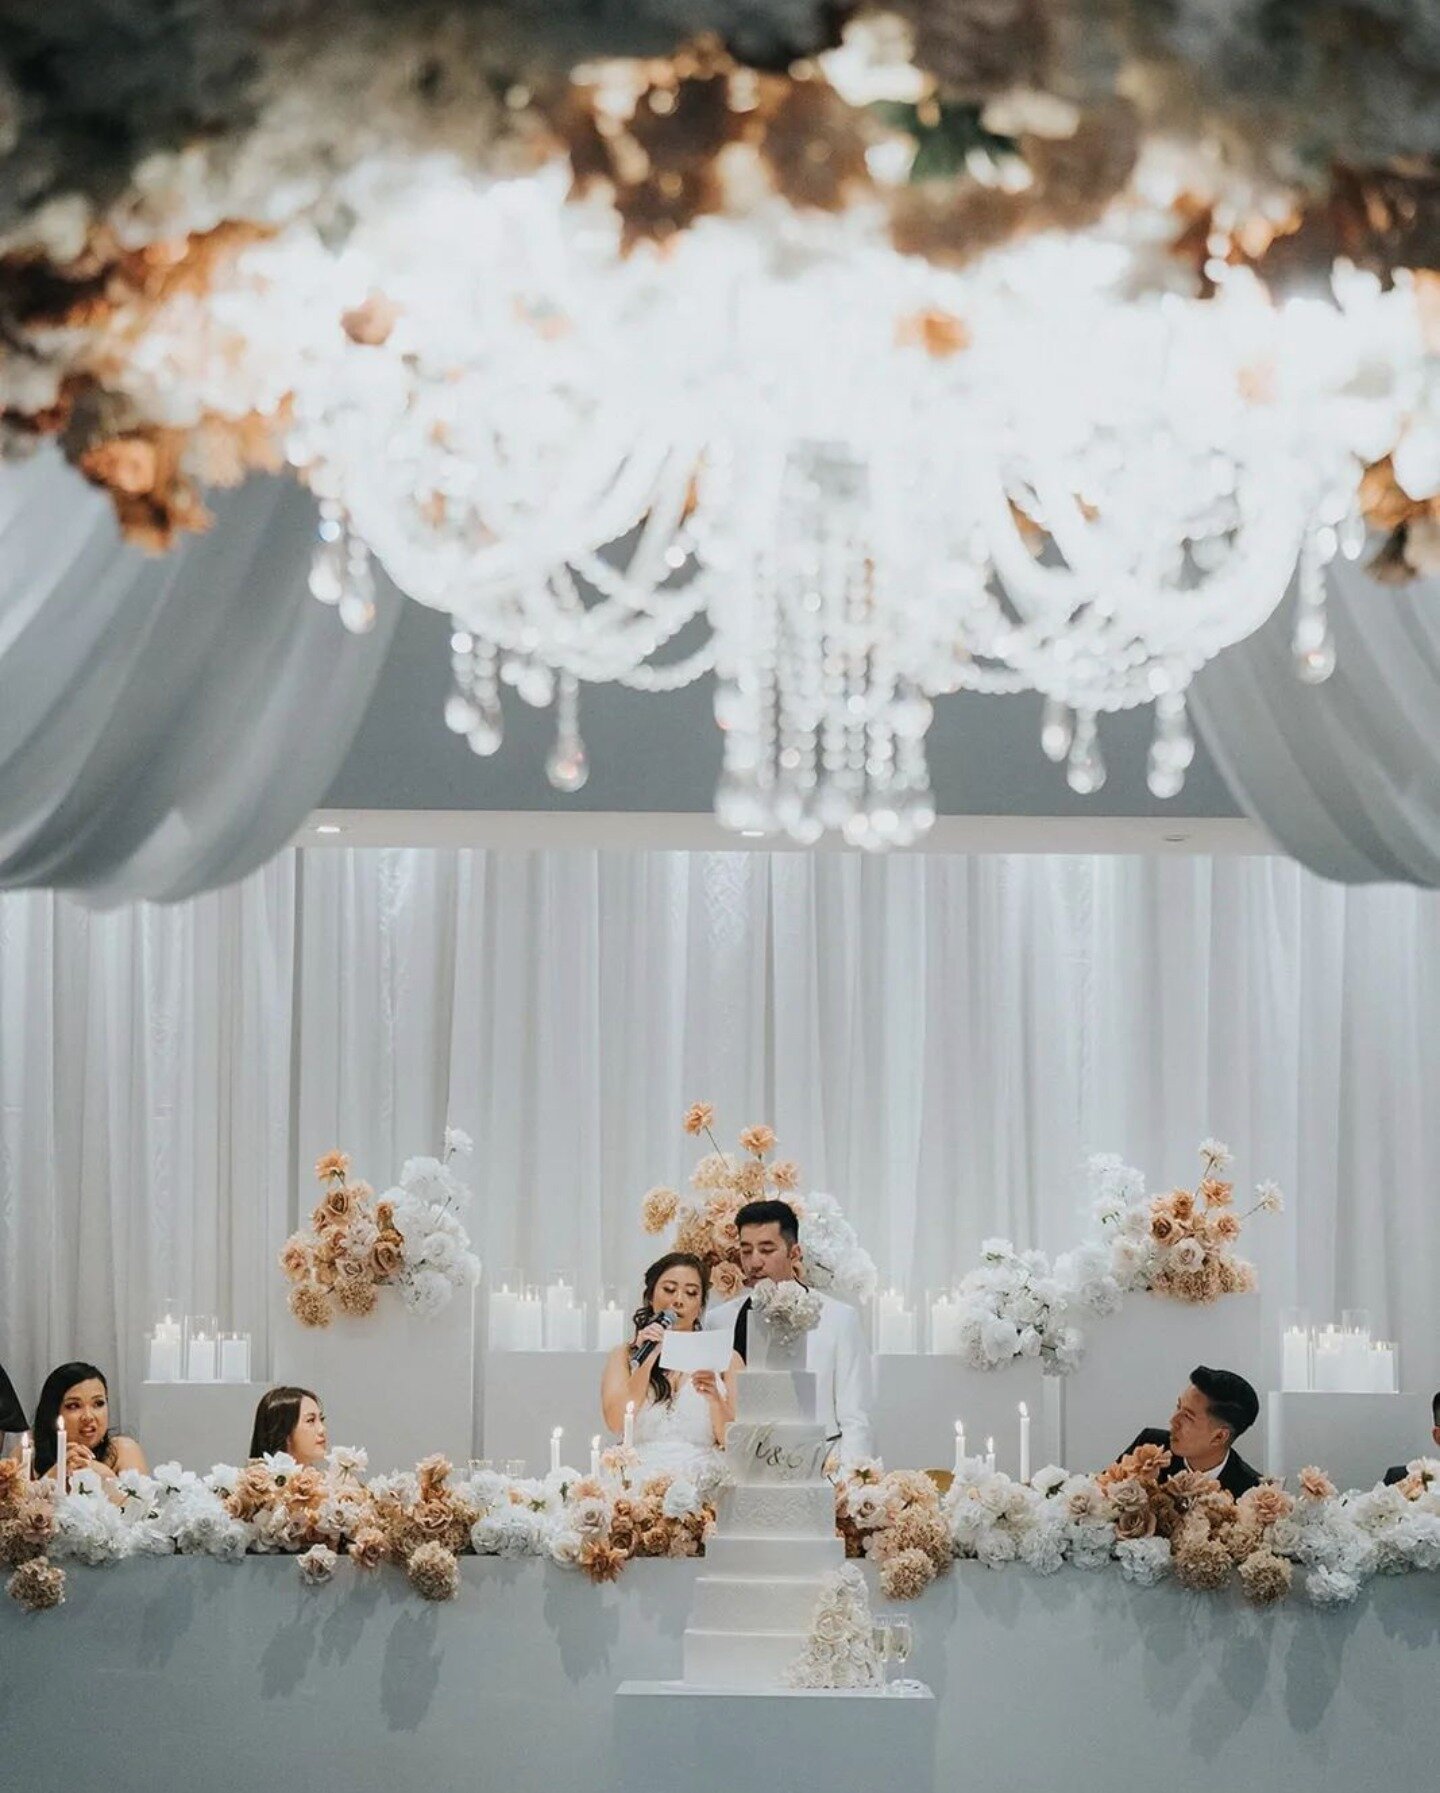 Wedding of Martin &amp; Mai. This is what a dream wedding looks like. Simply gorgeous in all the details. We we're so thrilled to be part of this special moment for this lovely happy couple. Congratulations! ✨
.
Styling + Design + Florals + custom pr